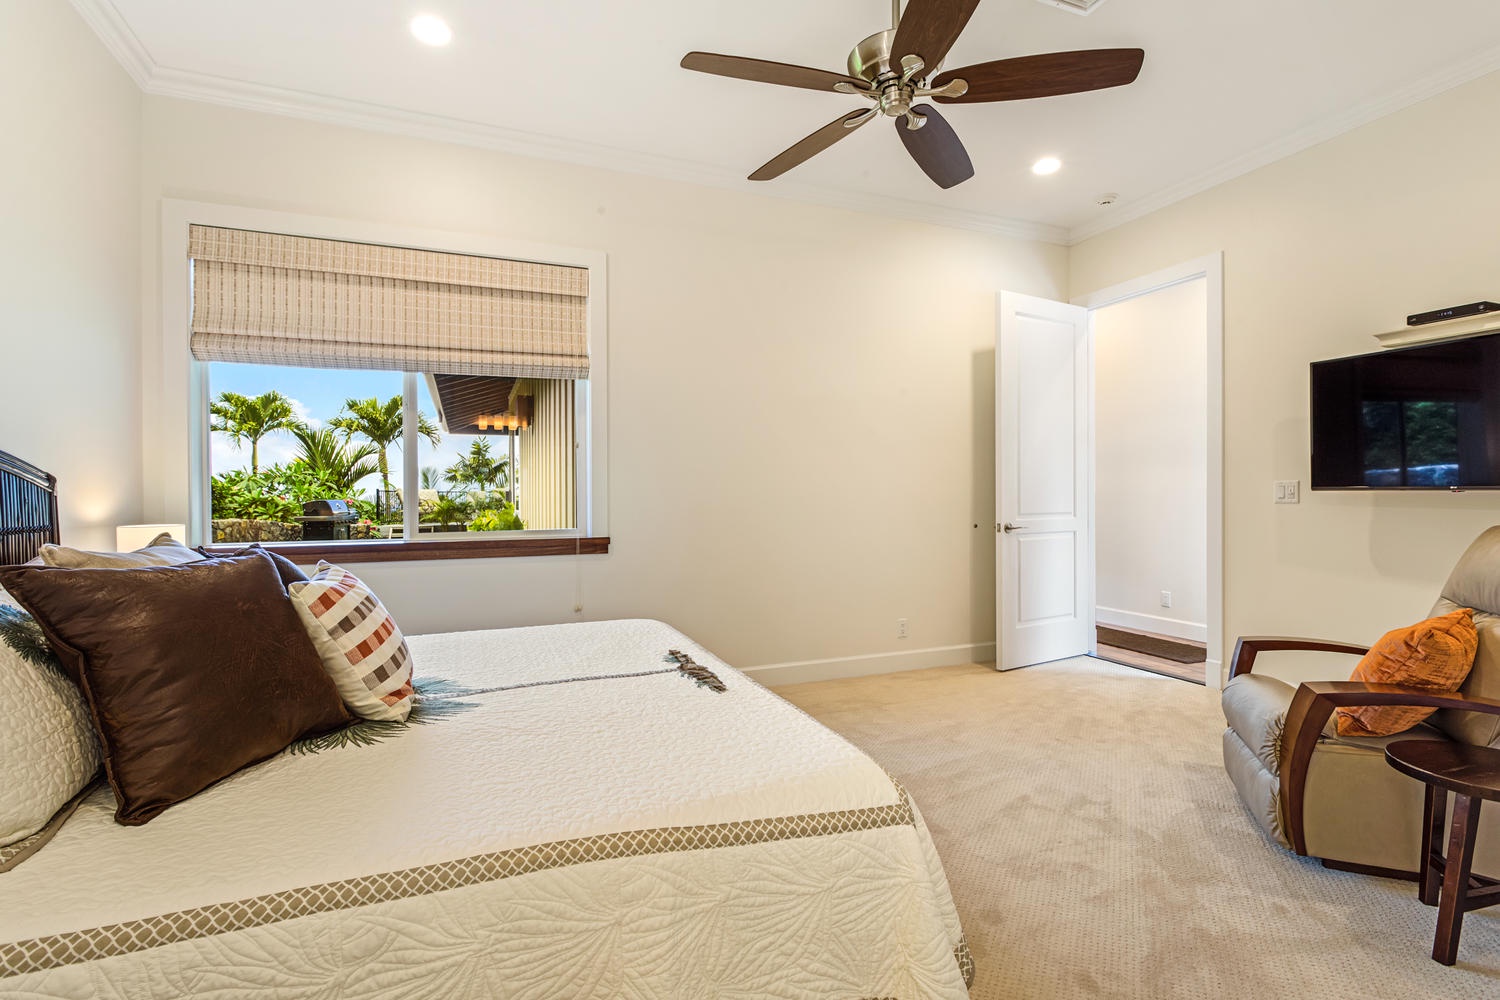 Kailua Kona Vacation Rentals, Ohana le'ale'a - This bedroom features a king bed, and a large en suite with a walk-in shower, and is located nearby the detached game room